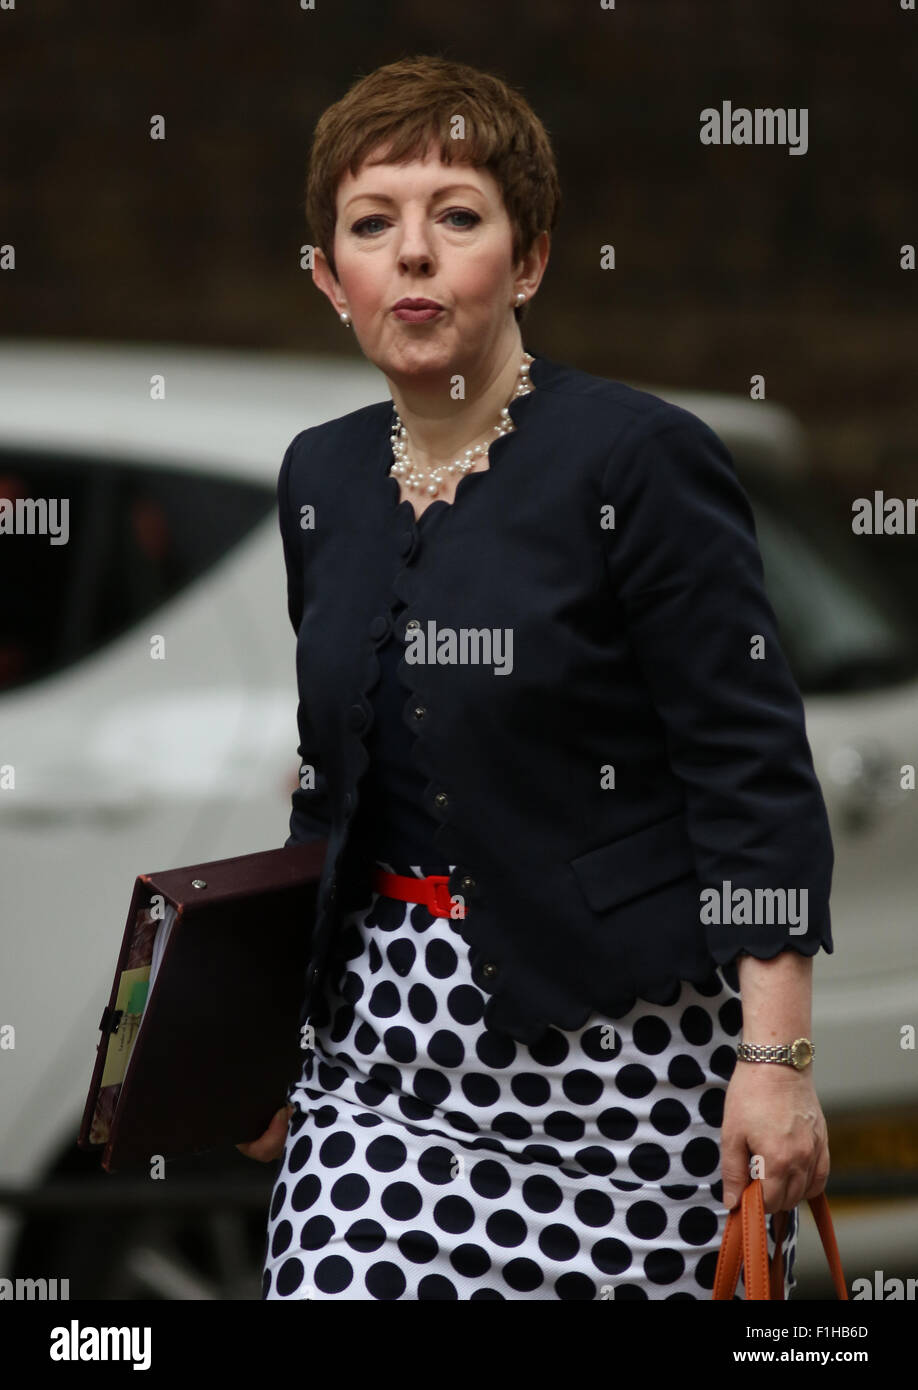 London, UK, 14th July 2015: Baroness Stowell  seen at Downing Street in London Stock Photo